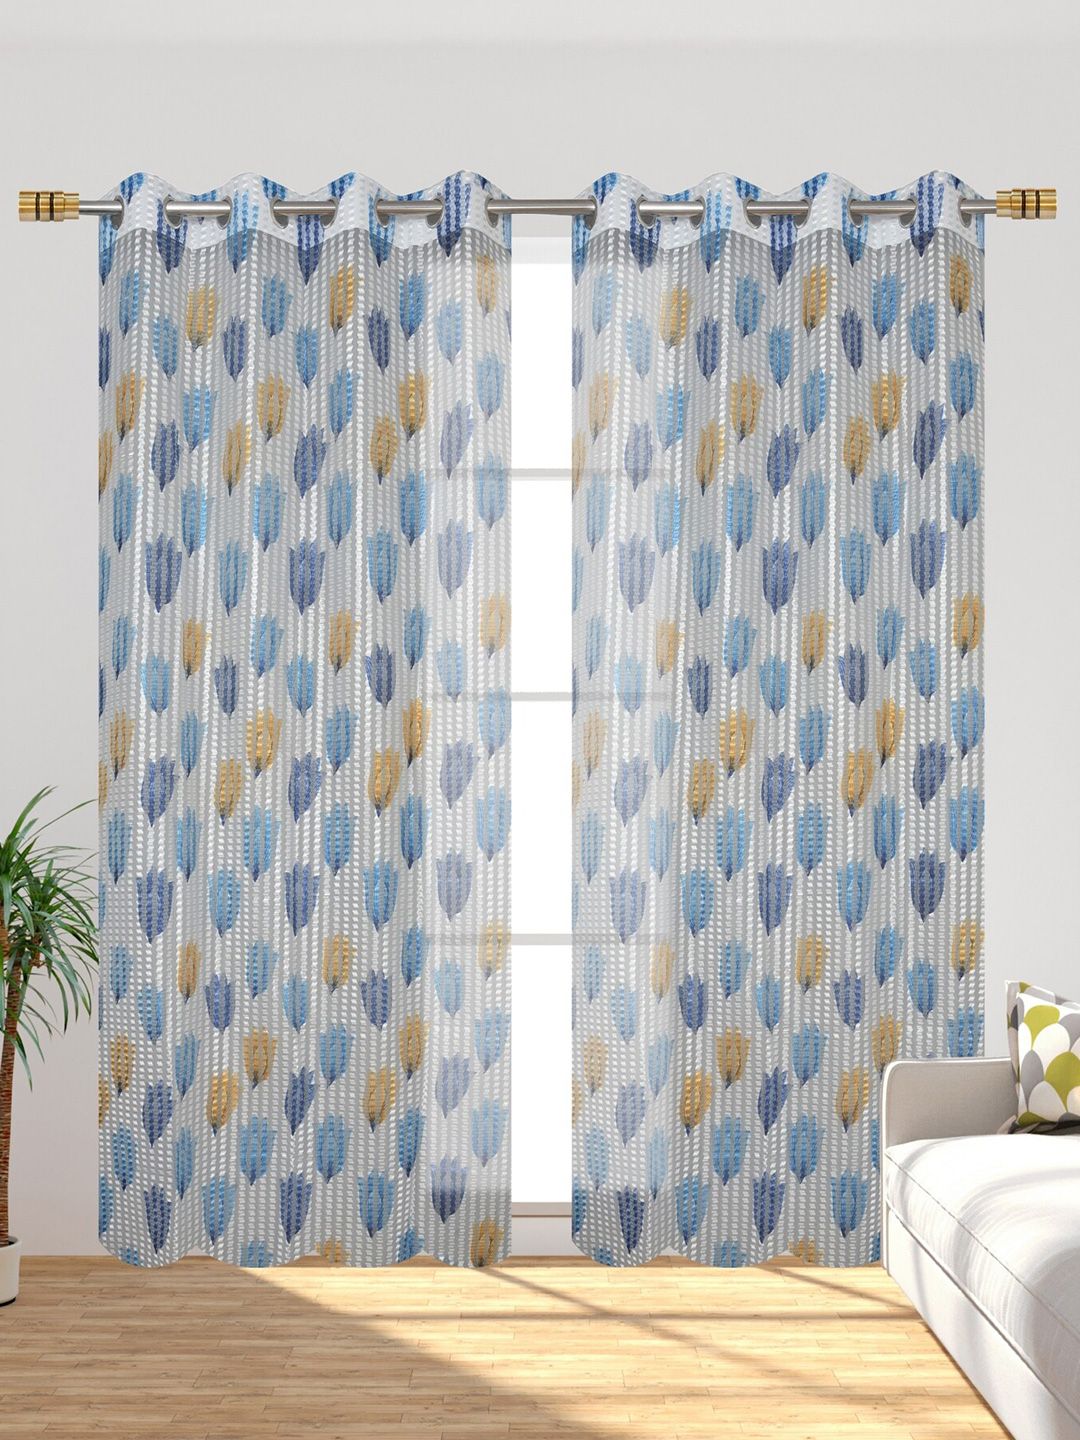 Homefab India Blue & Grey Set of 2 Floral Sheer Long Door Curtains Price in India